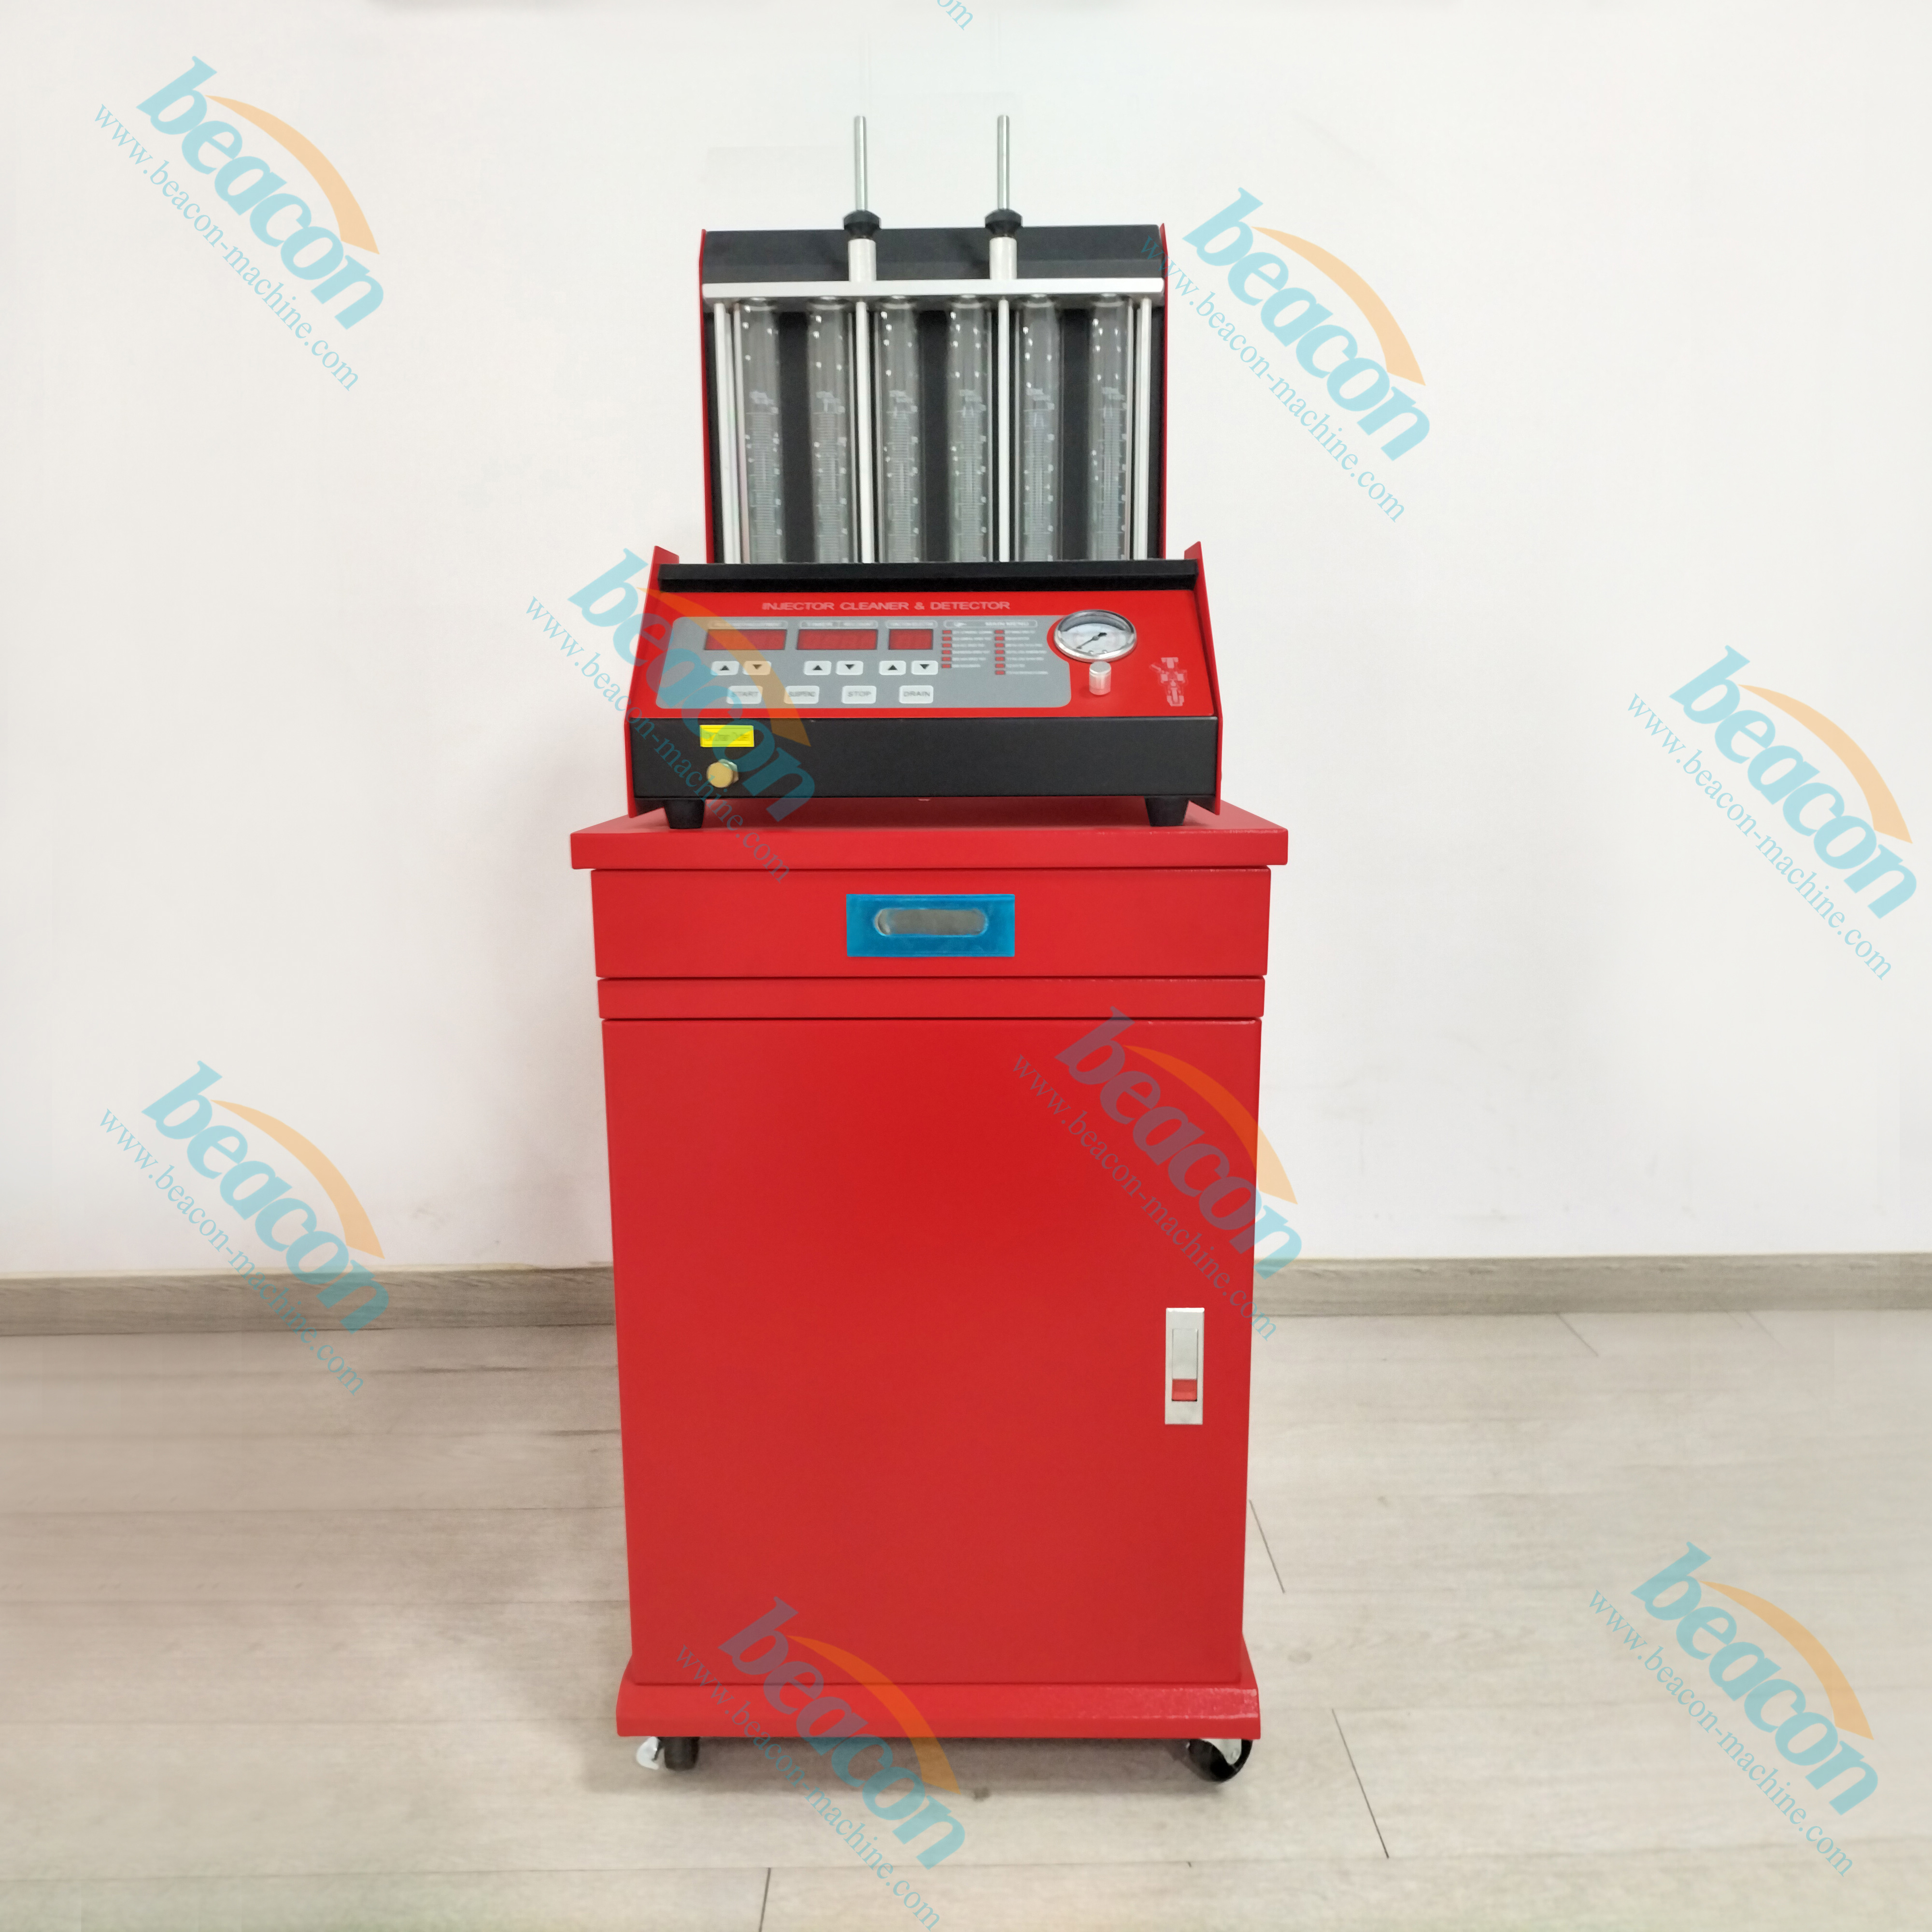 BC-6C Car Fuel Injector Cleaning and Tester Machine Ultrasonic Cleaner Gasoline Fuel Injector 6-Cylinders